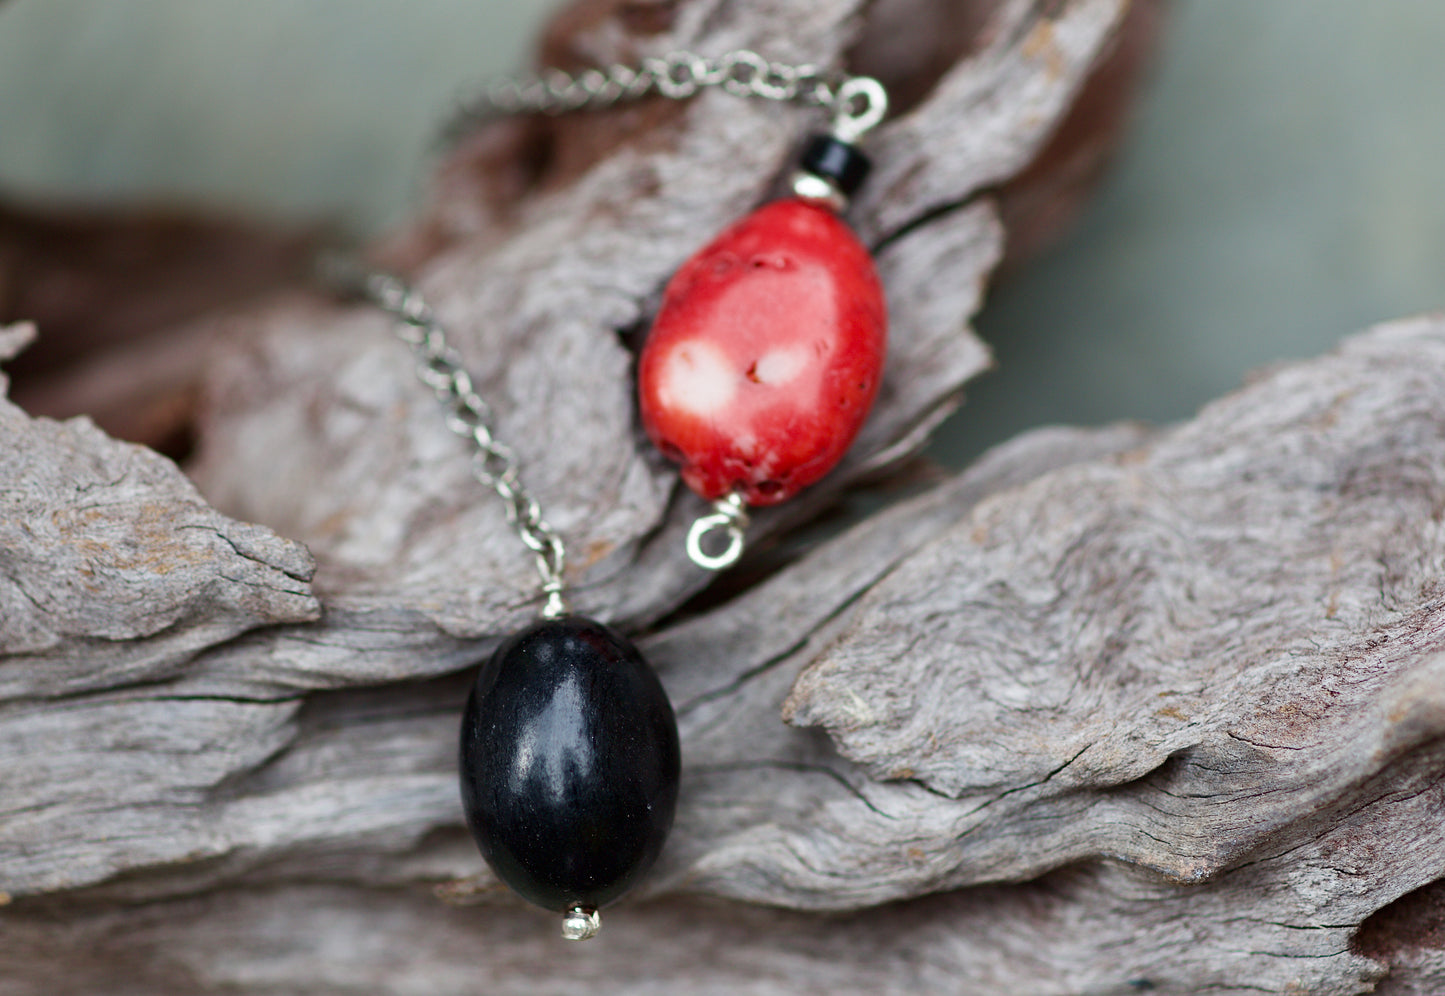 Jet, Obsidian, Red Coral, Thai and Sterling Silver Double-sided Pendulum